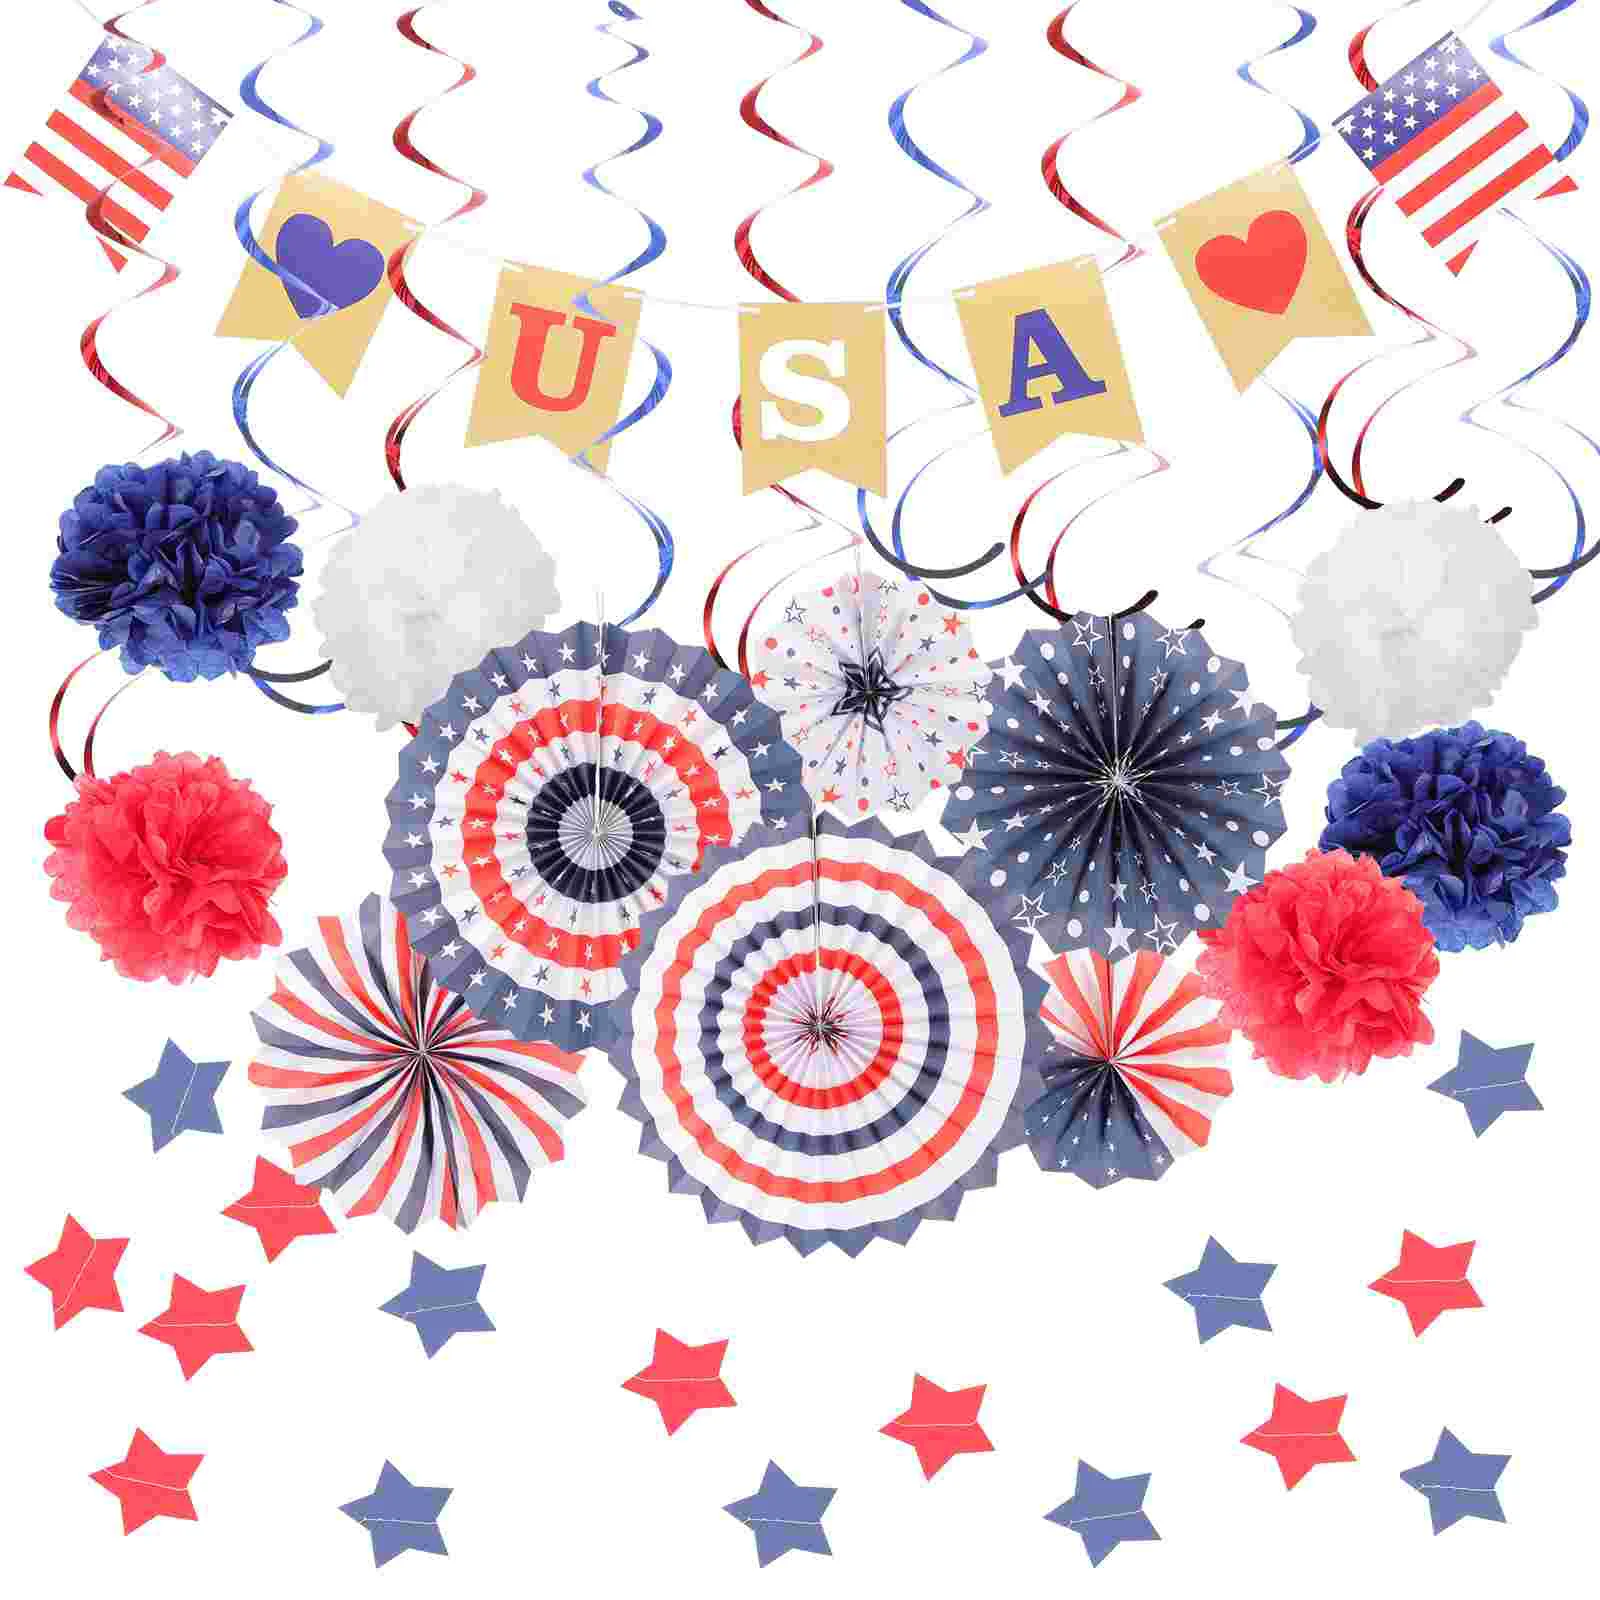 

1 Set Of Home Decor Paper Fans Usa Patriotic Independence Fourth Of July Decorations 4th Of July Decorations Patriotic Decor